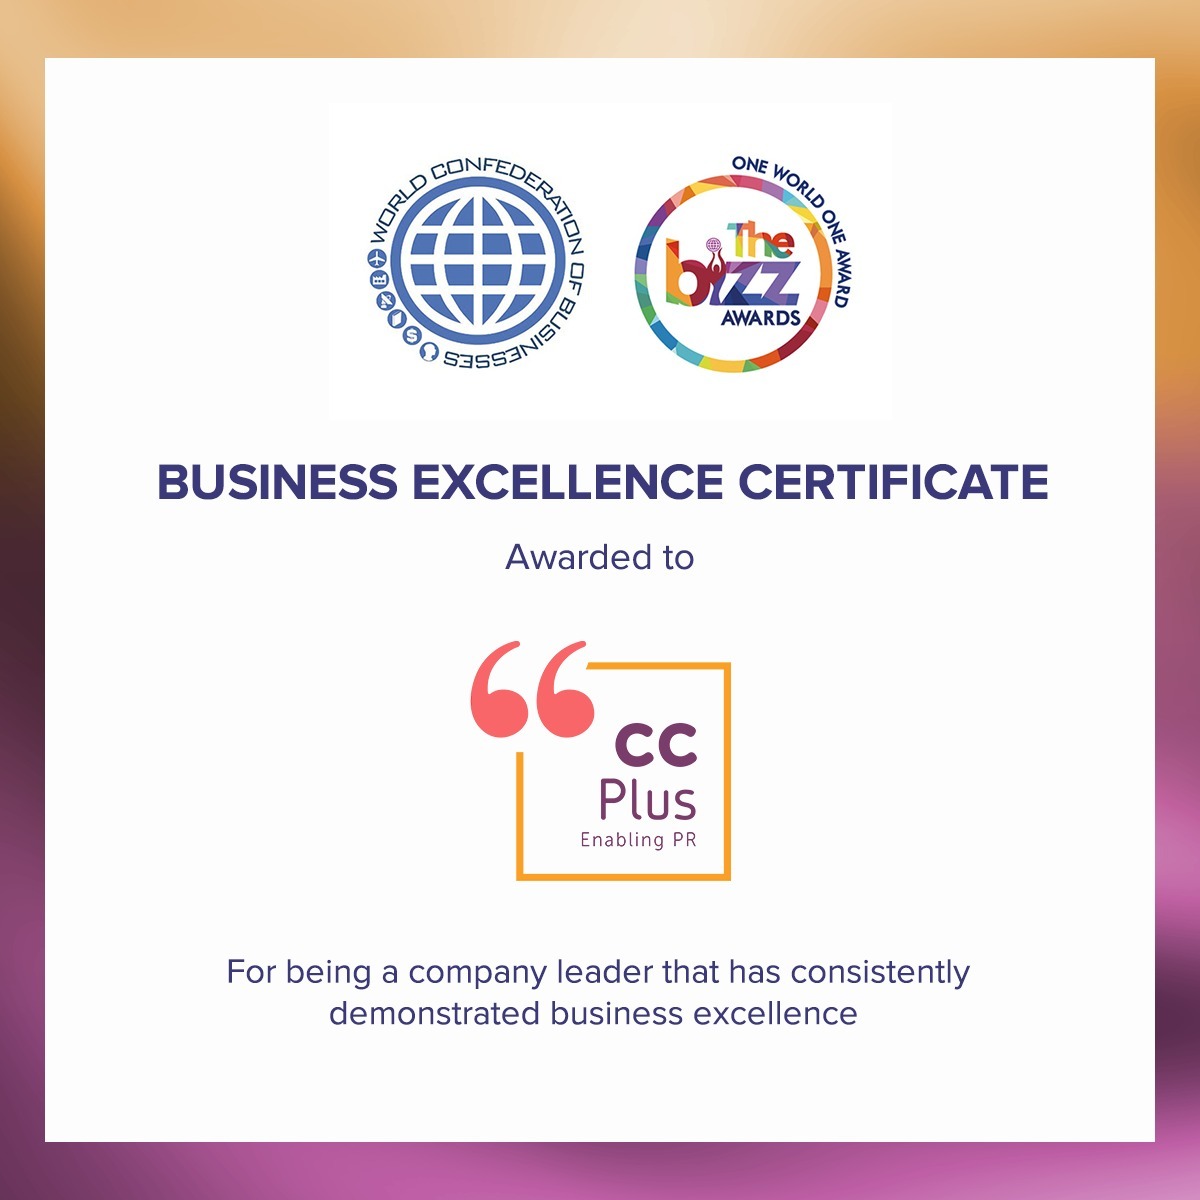 CC Plus has been honored with THE BIZZ AWARD for our commitment to business excellence.